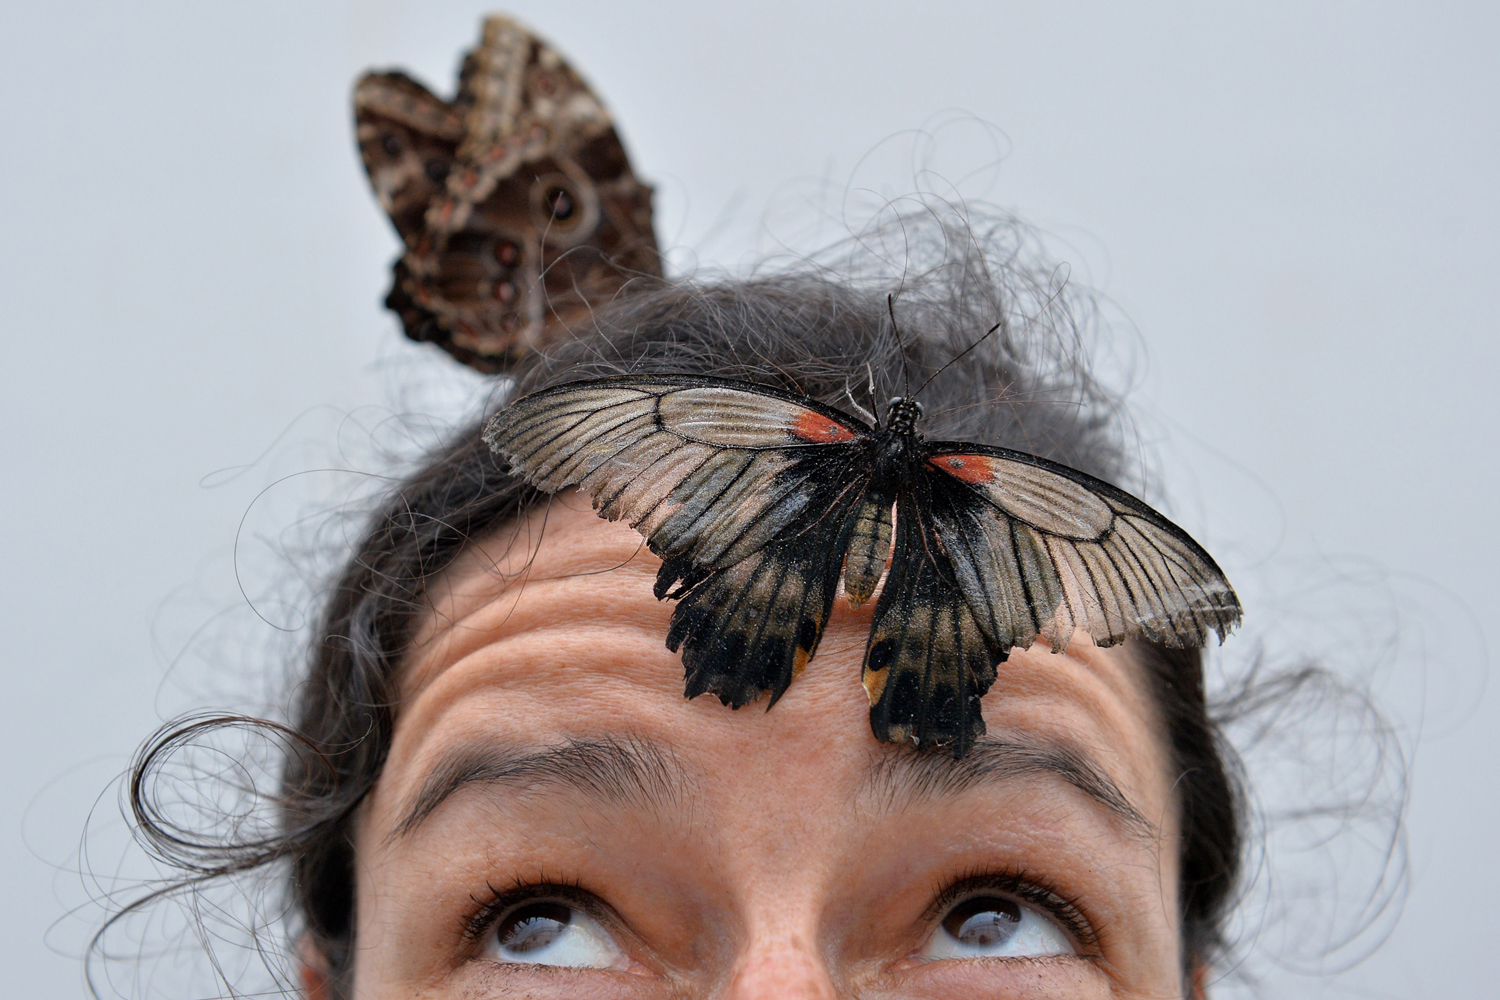 Mar. 31, 2014. 
                              A Papilio memmon butterfly sits on a womans head during a photocall in the Natural History Museum's 'Sensational Butterflies' outdoor butterfly house in London.